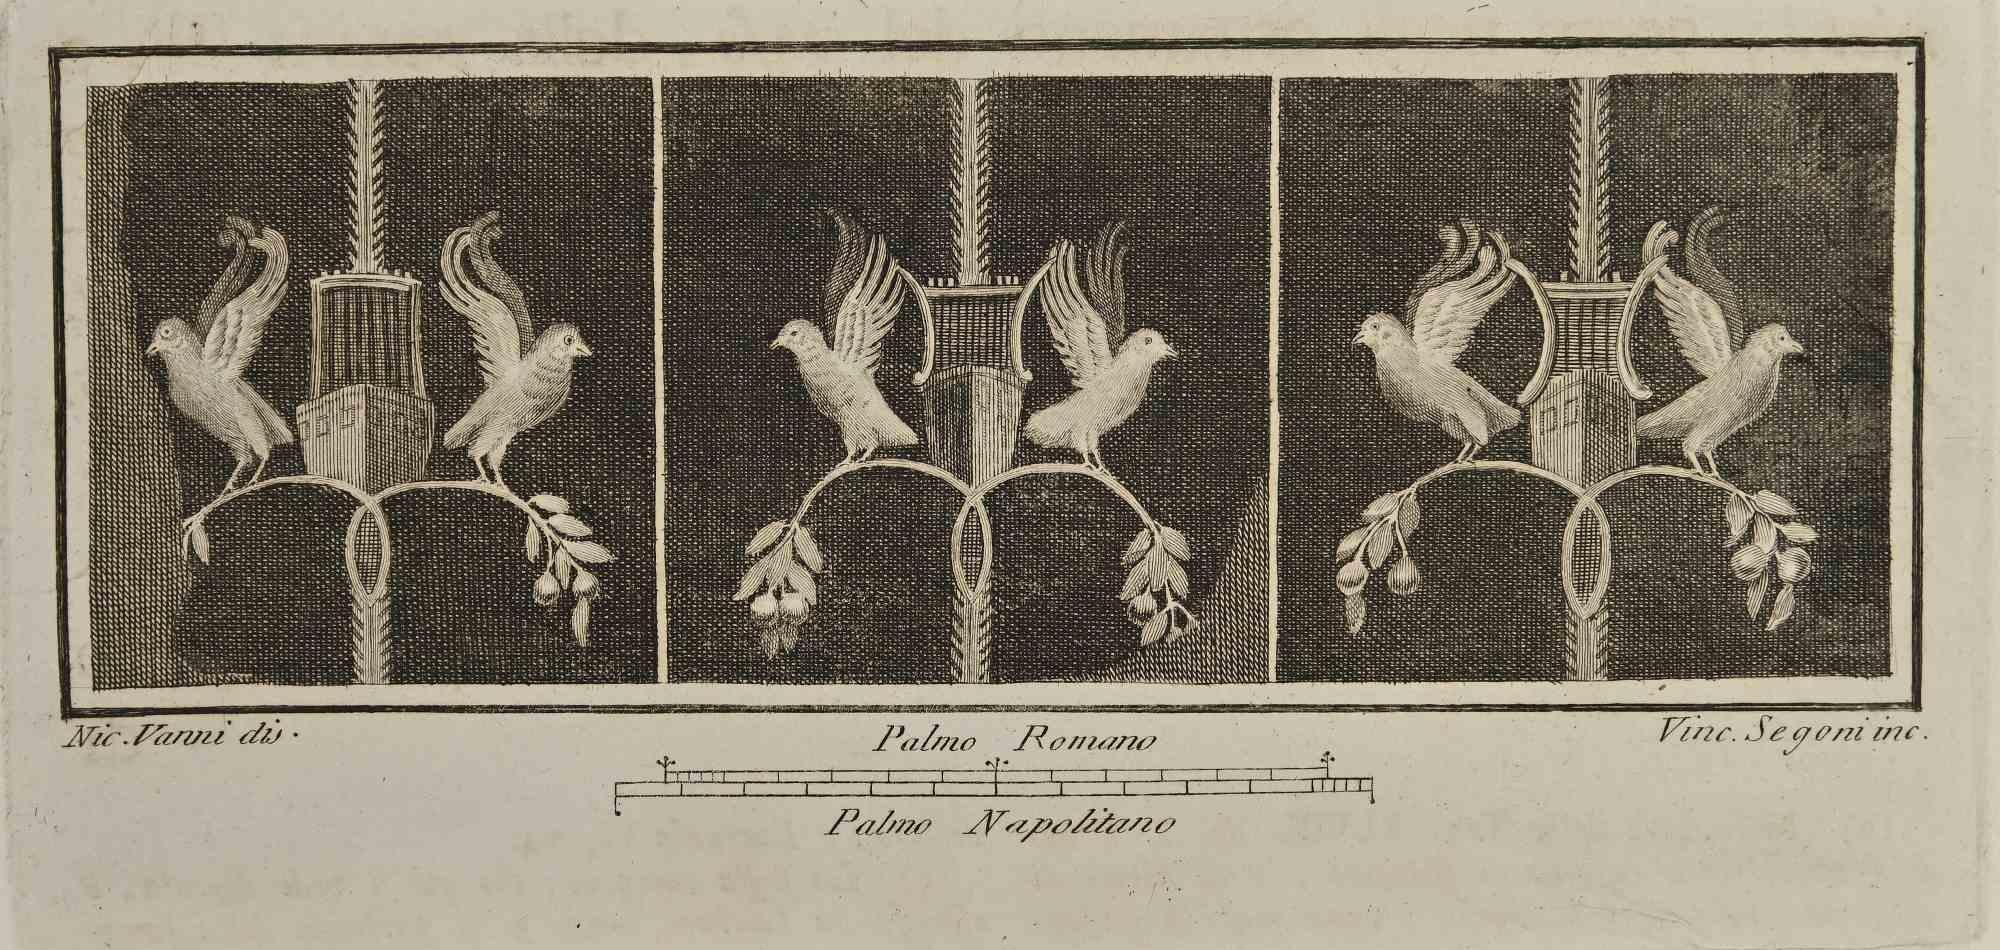 Still Life Fresco With Birds from "Antiquities of Herculaneum" is an etching on paper realized by Vincenzo Segoni in the 18th Century.

Signed on the plate.

Good conditions with some folding.

The etching belongs to the print suite “Antiquities of